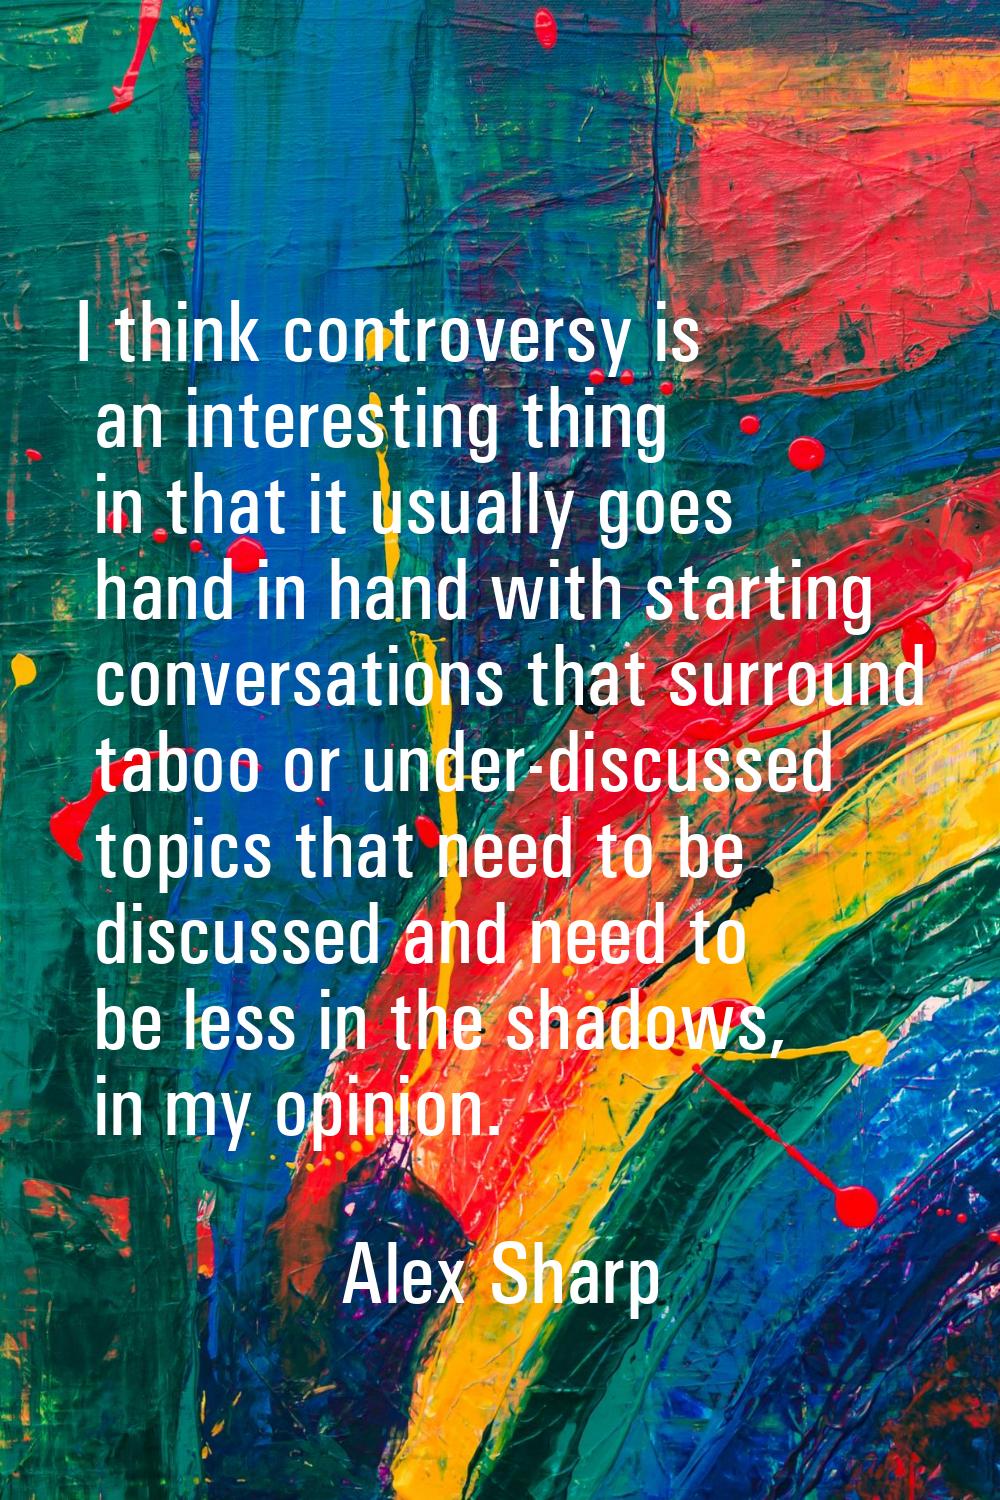 I think controversy is an interesting thing in that it usually goes hand in hand with starting conv